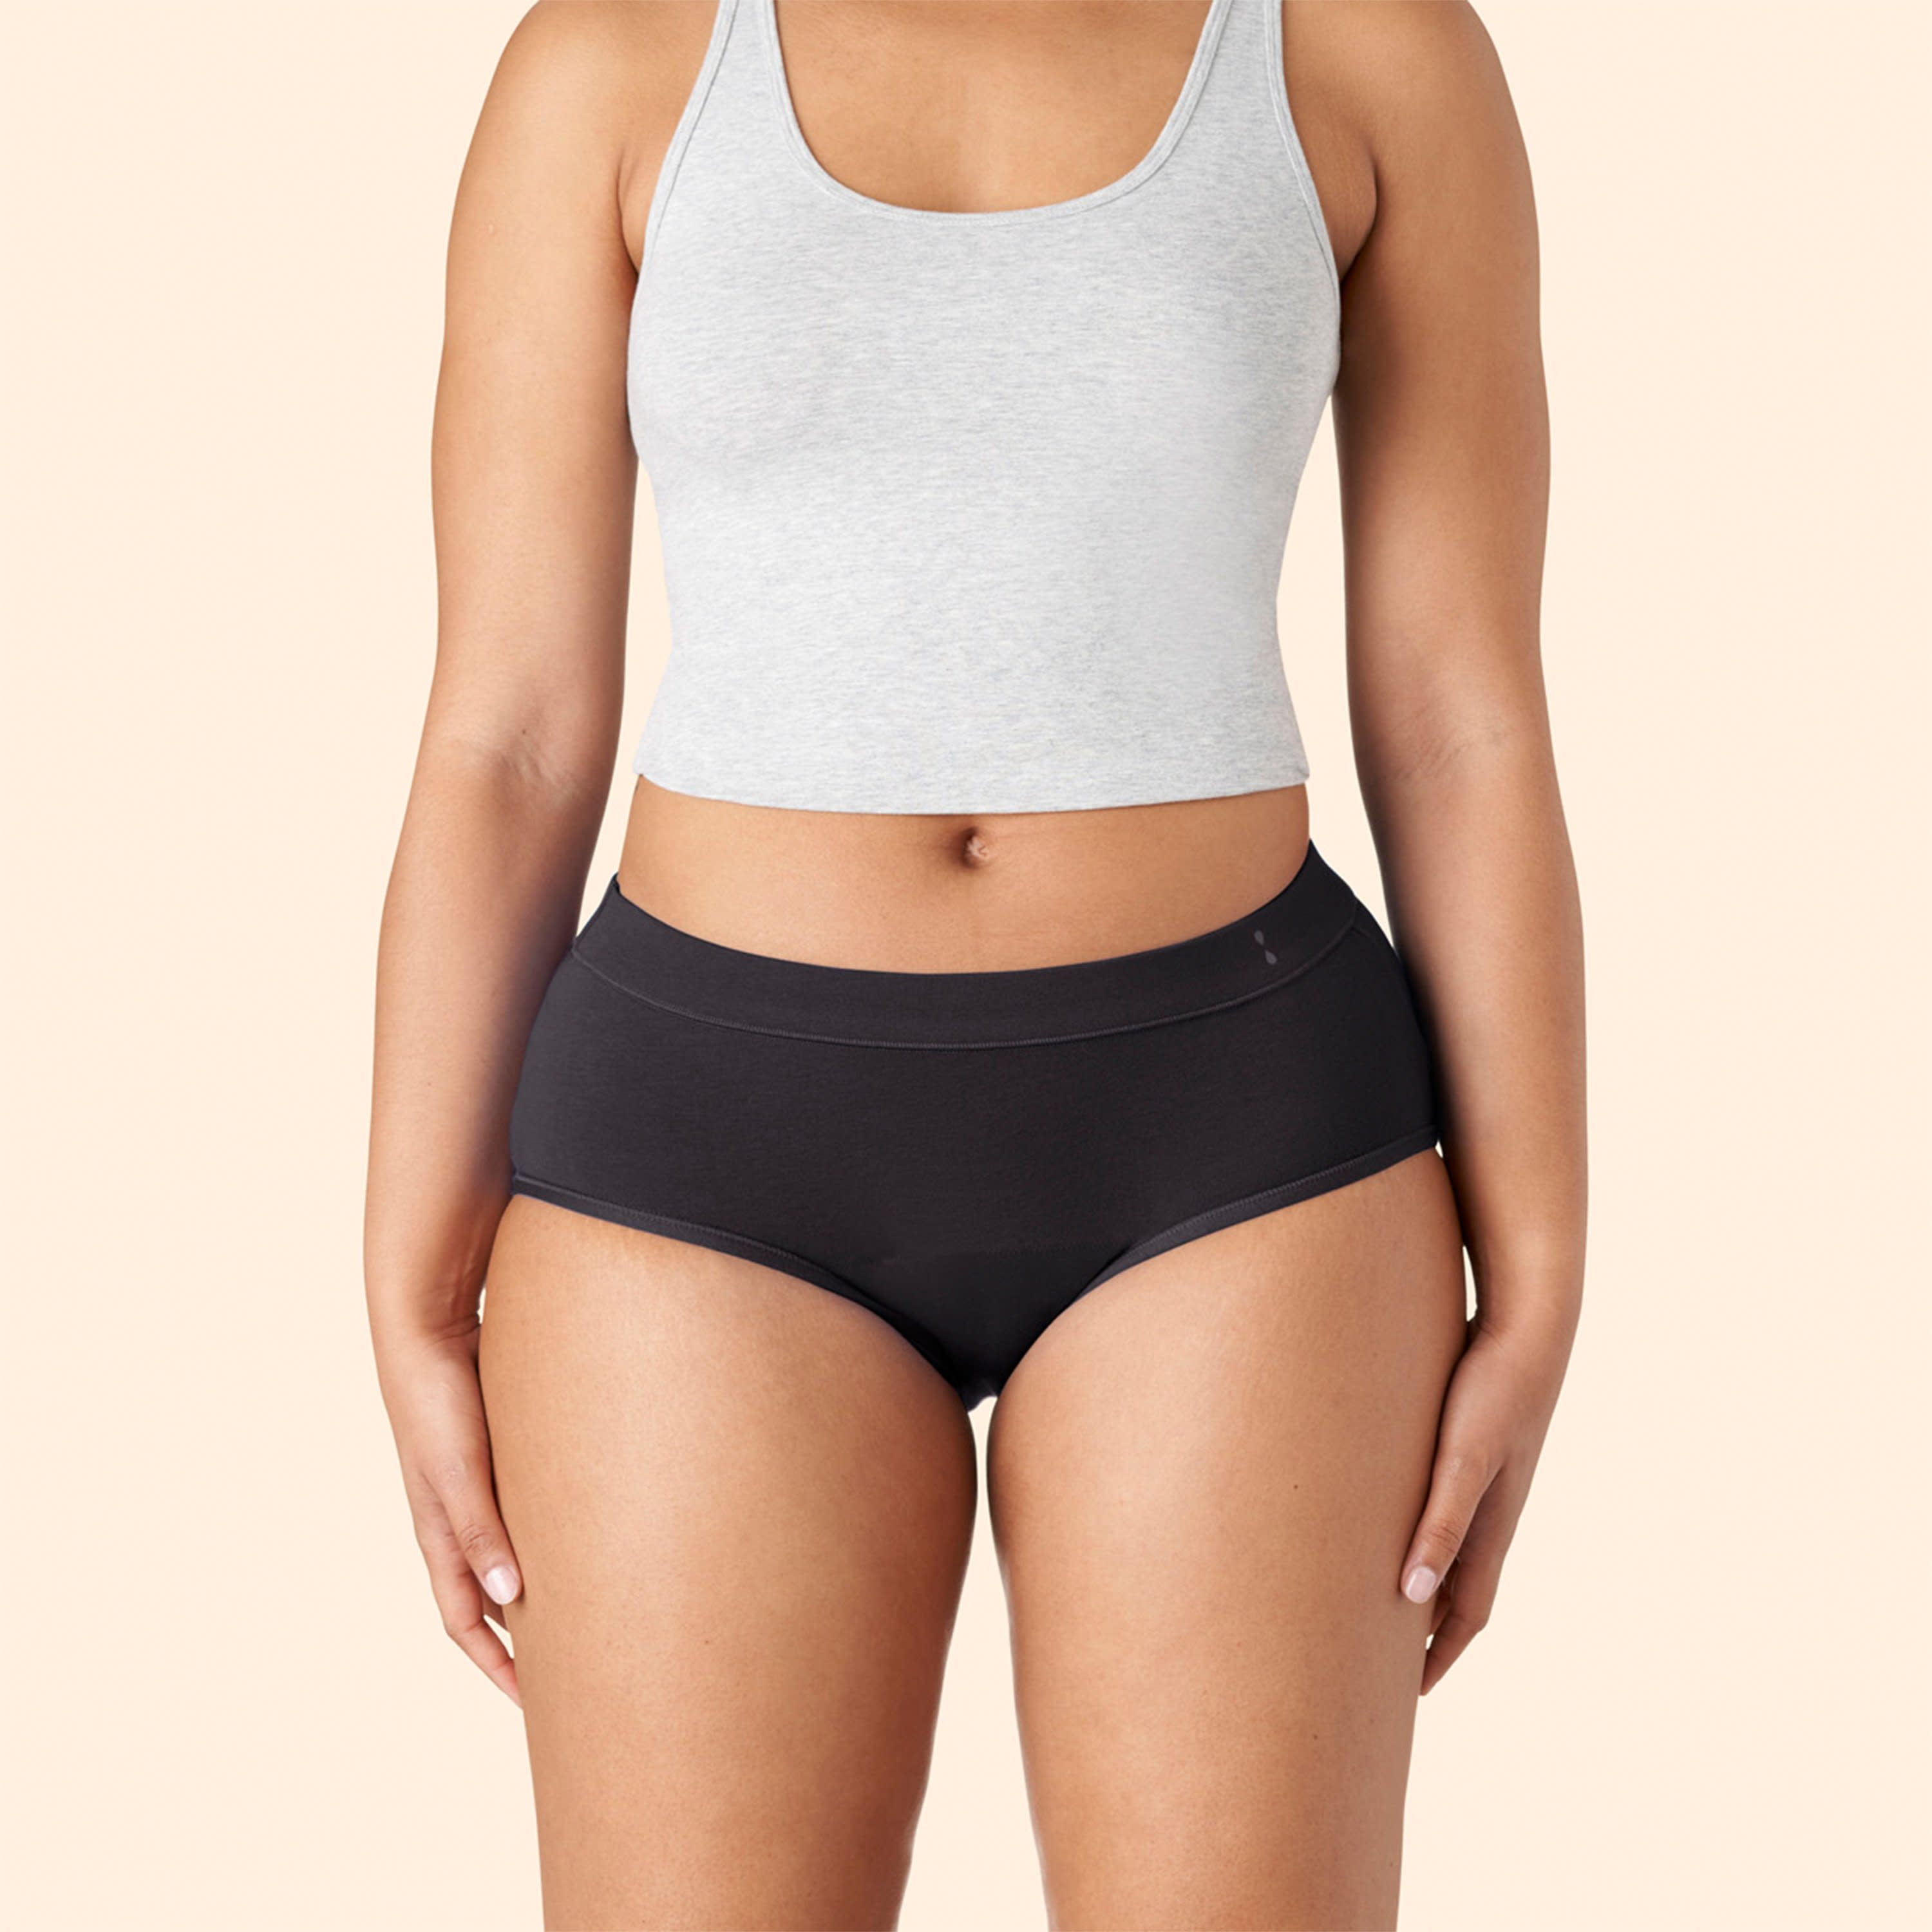 Thinx for All Women's Moderate Absorbency Boy Shorts Period Underwear -  Black XL 1 ct